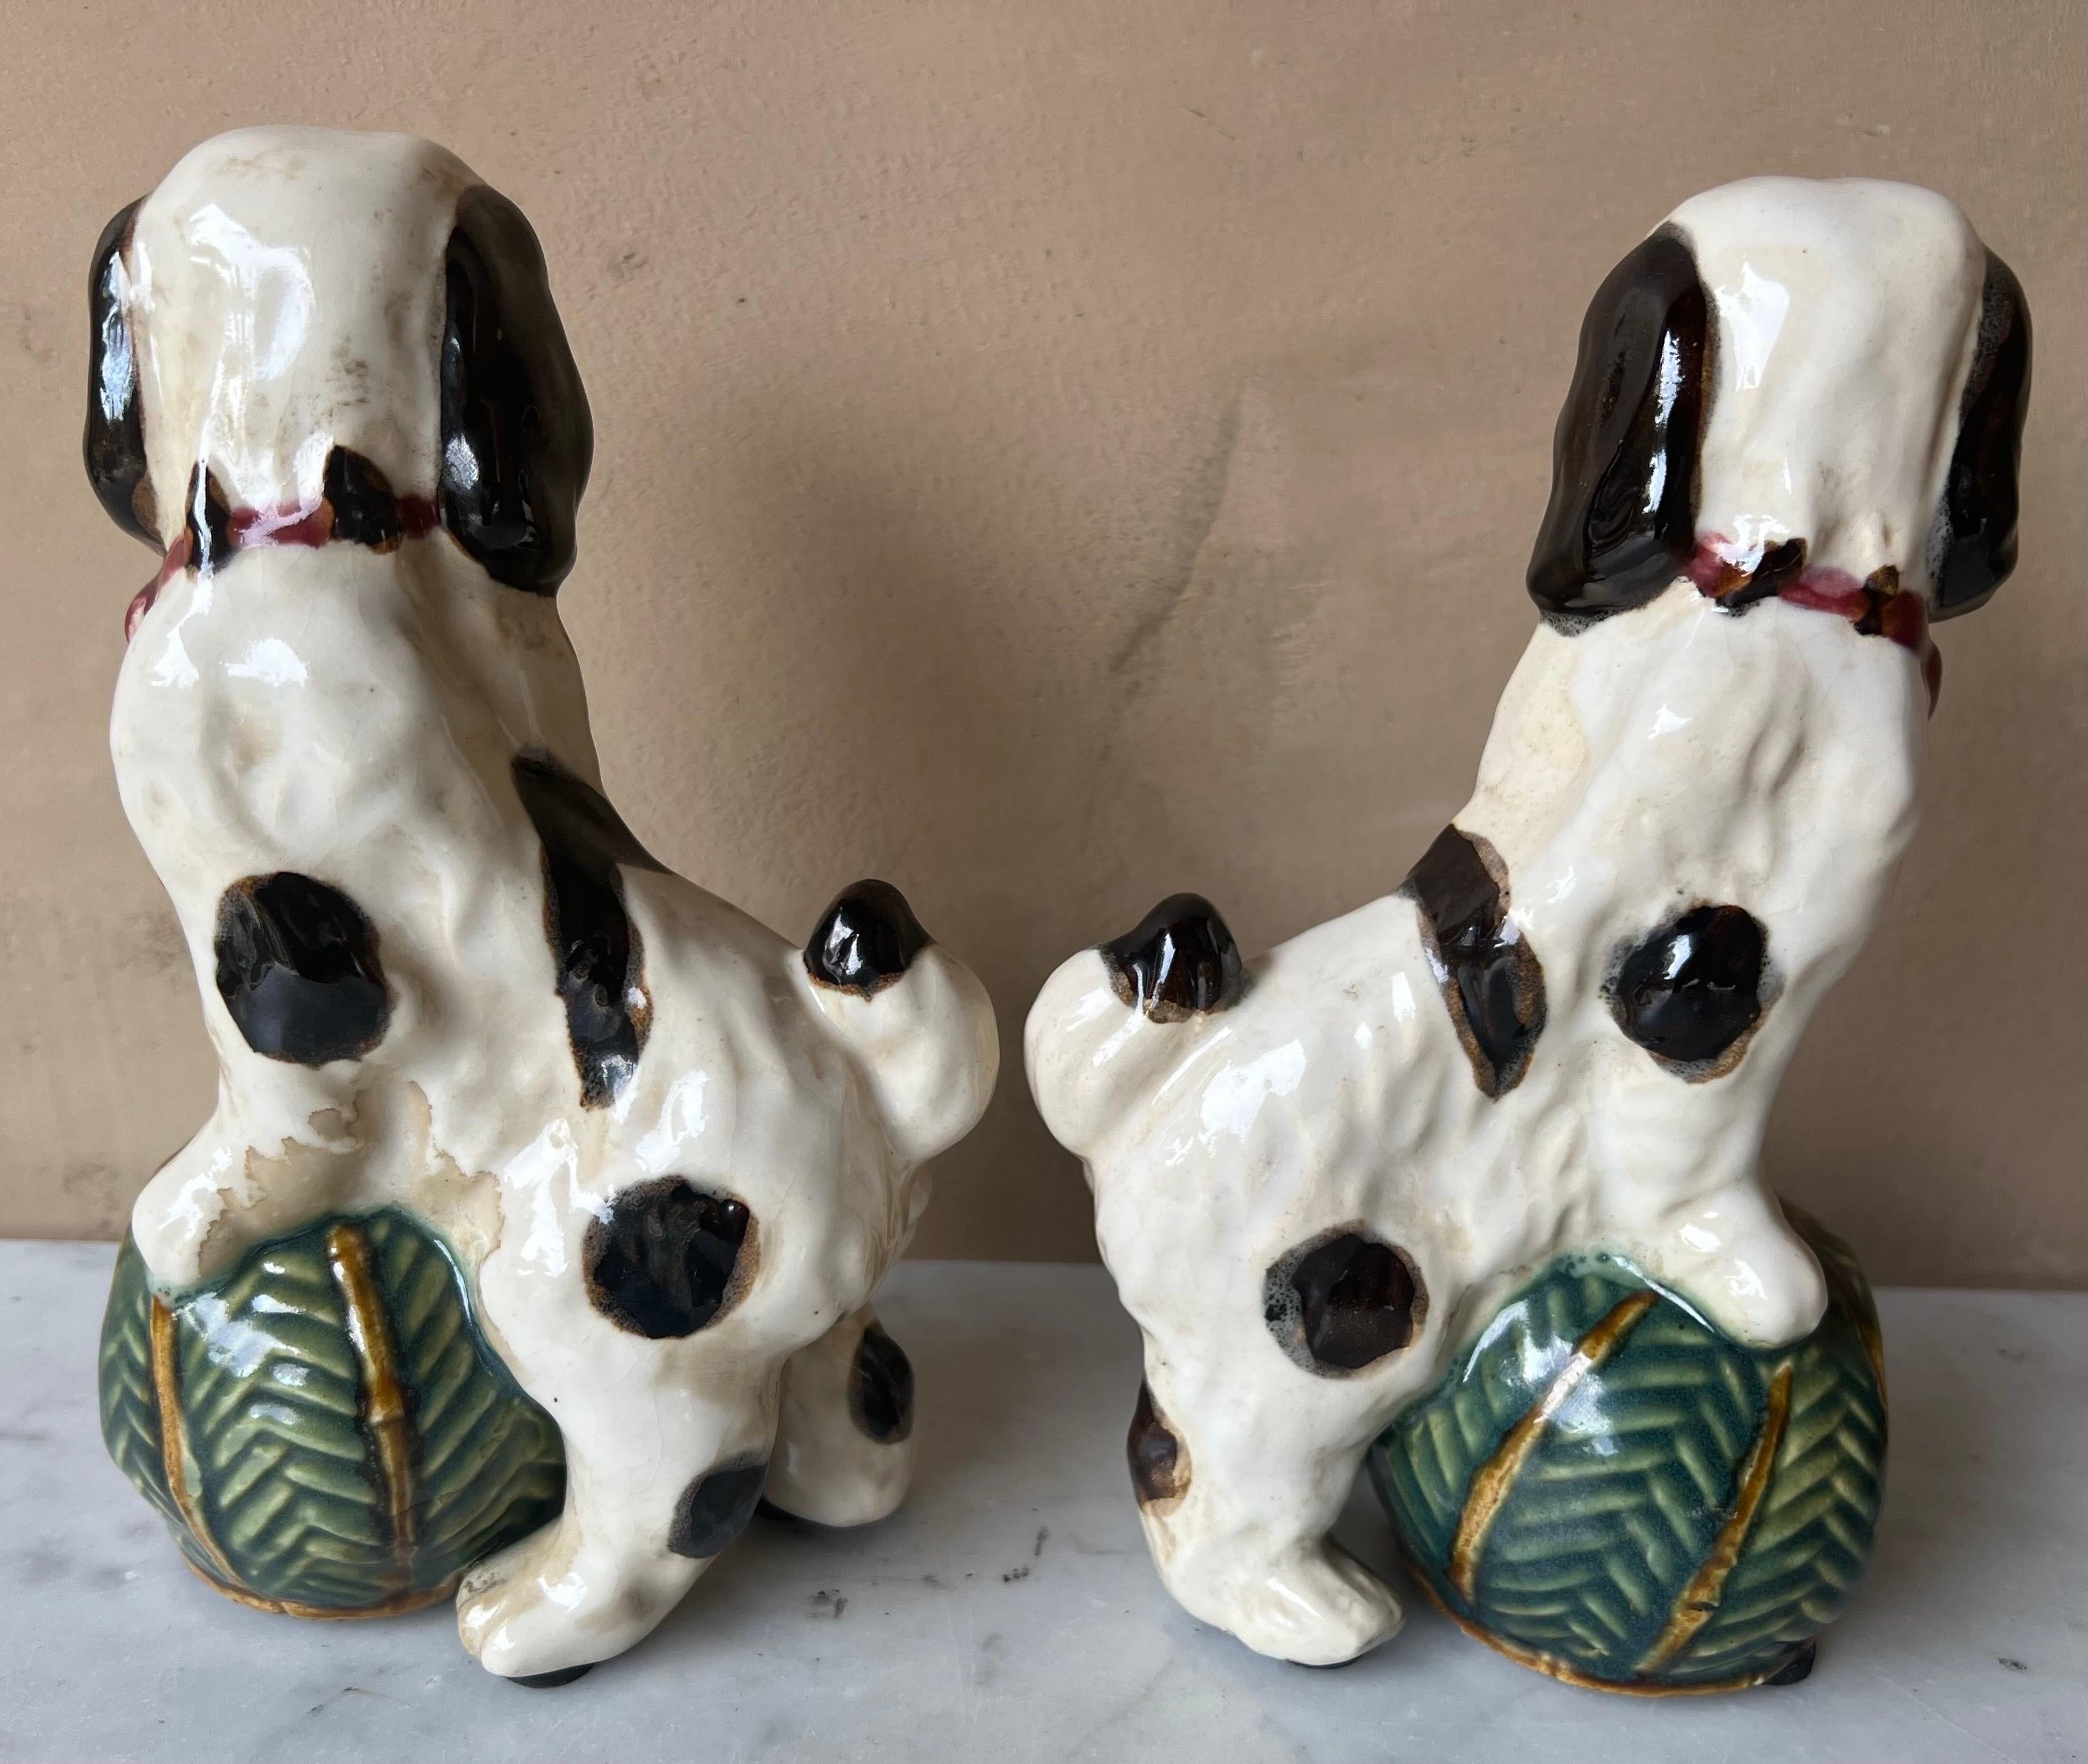 Molded Ceramic Painted English Cavalier Dog Bookends - a Pair, C. 1940s